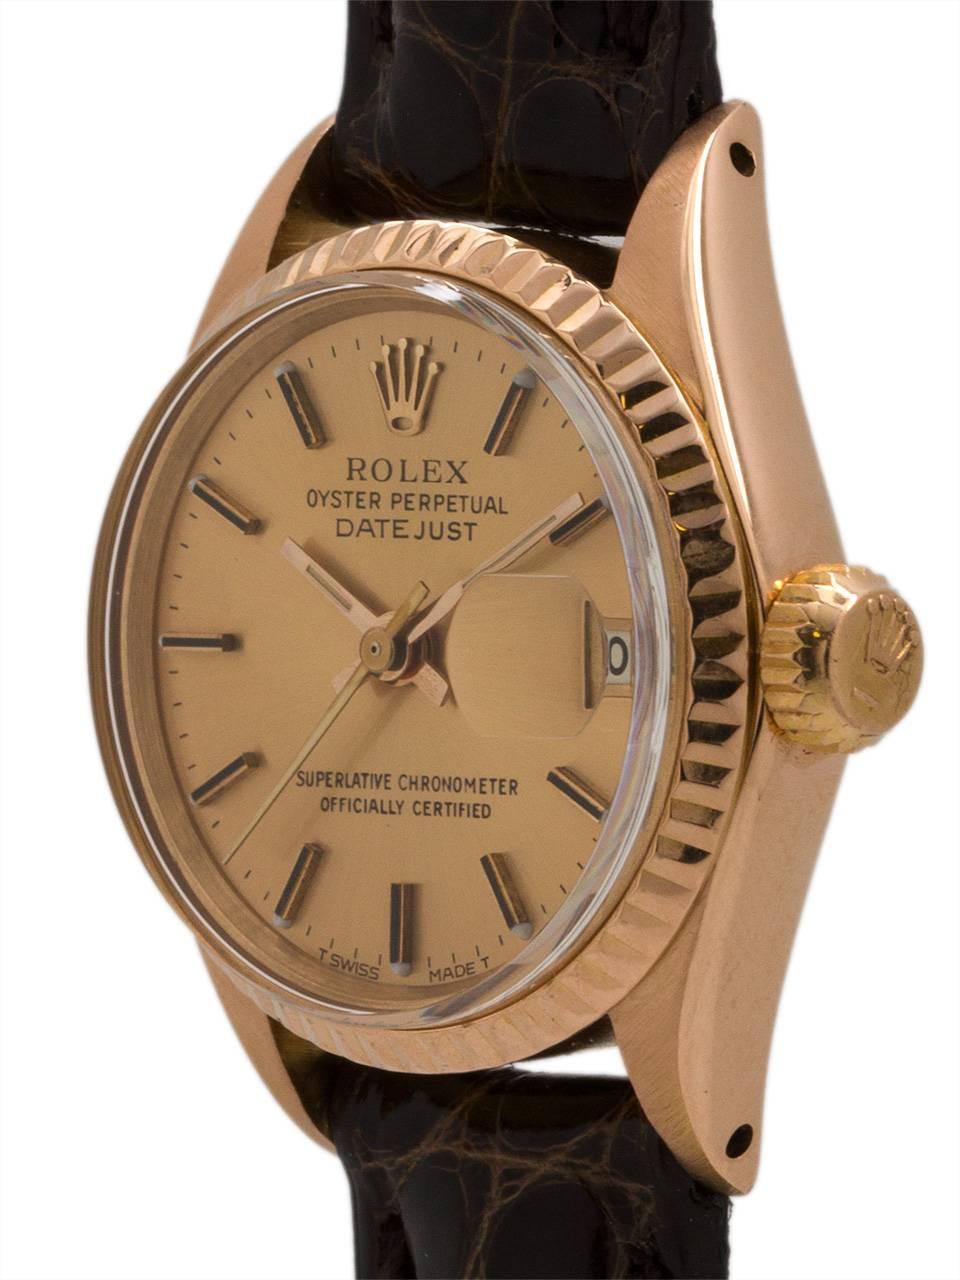 Vintage lady’s Rolex 18K rose gold Datejust ref# 6517 serial # L3 million circa 1987. Featuring a 27mm diameter Oyster case with screw down case back and screw down crown. With fluted bezel, acrylic dome crystal, and beautifully restored rose dial